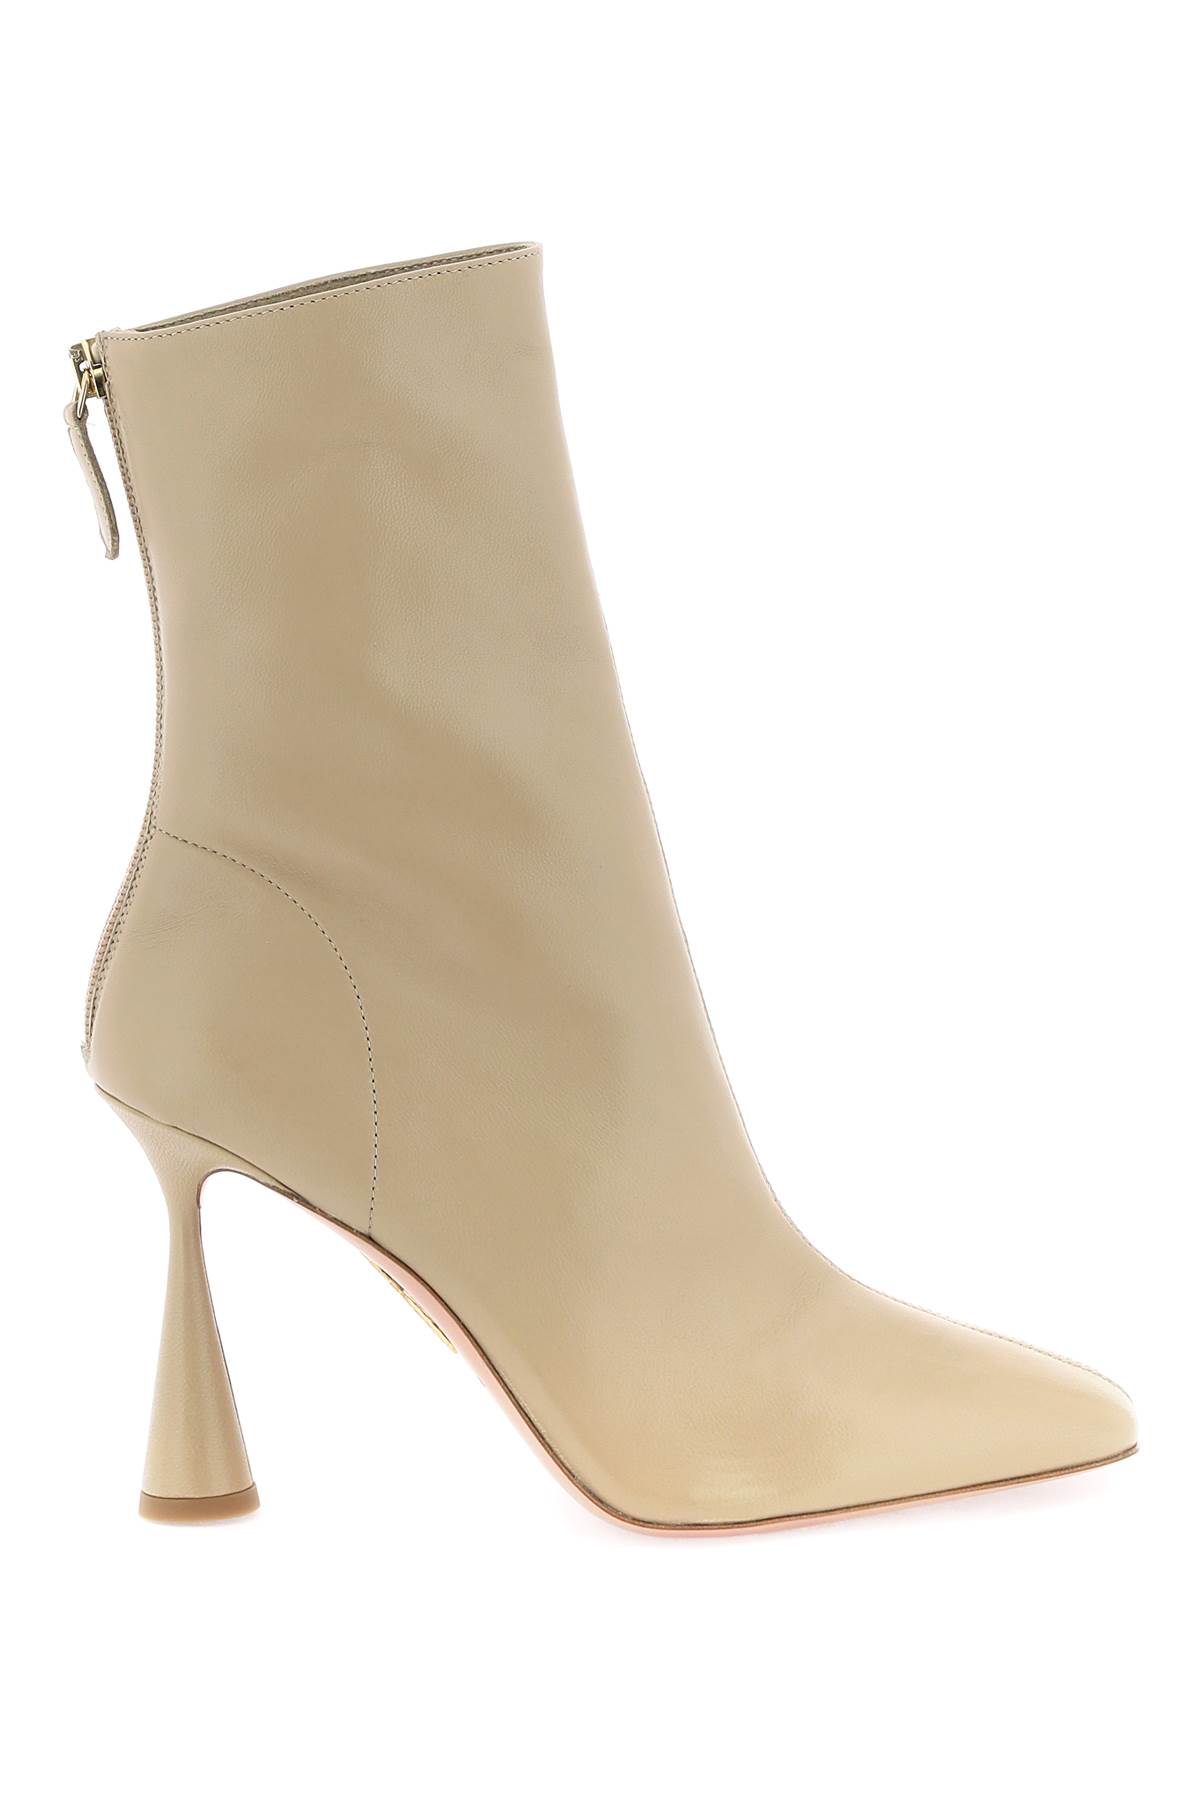 Shop Aquazzura Amore 95 Ankle Boots In Soft Beige (beige)